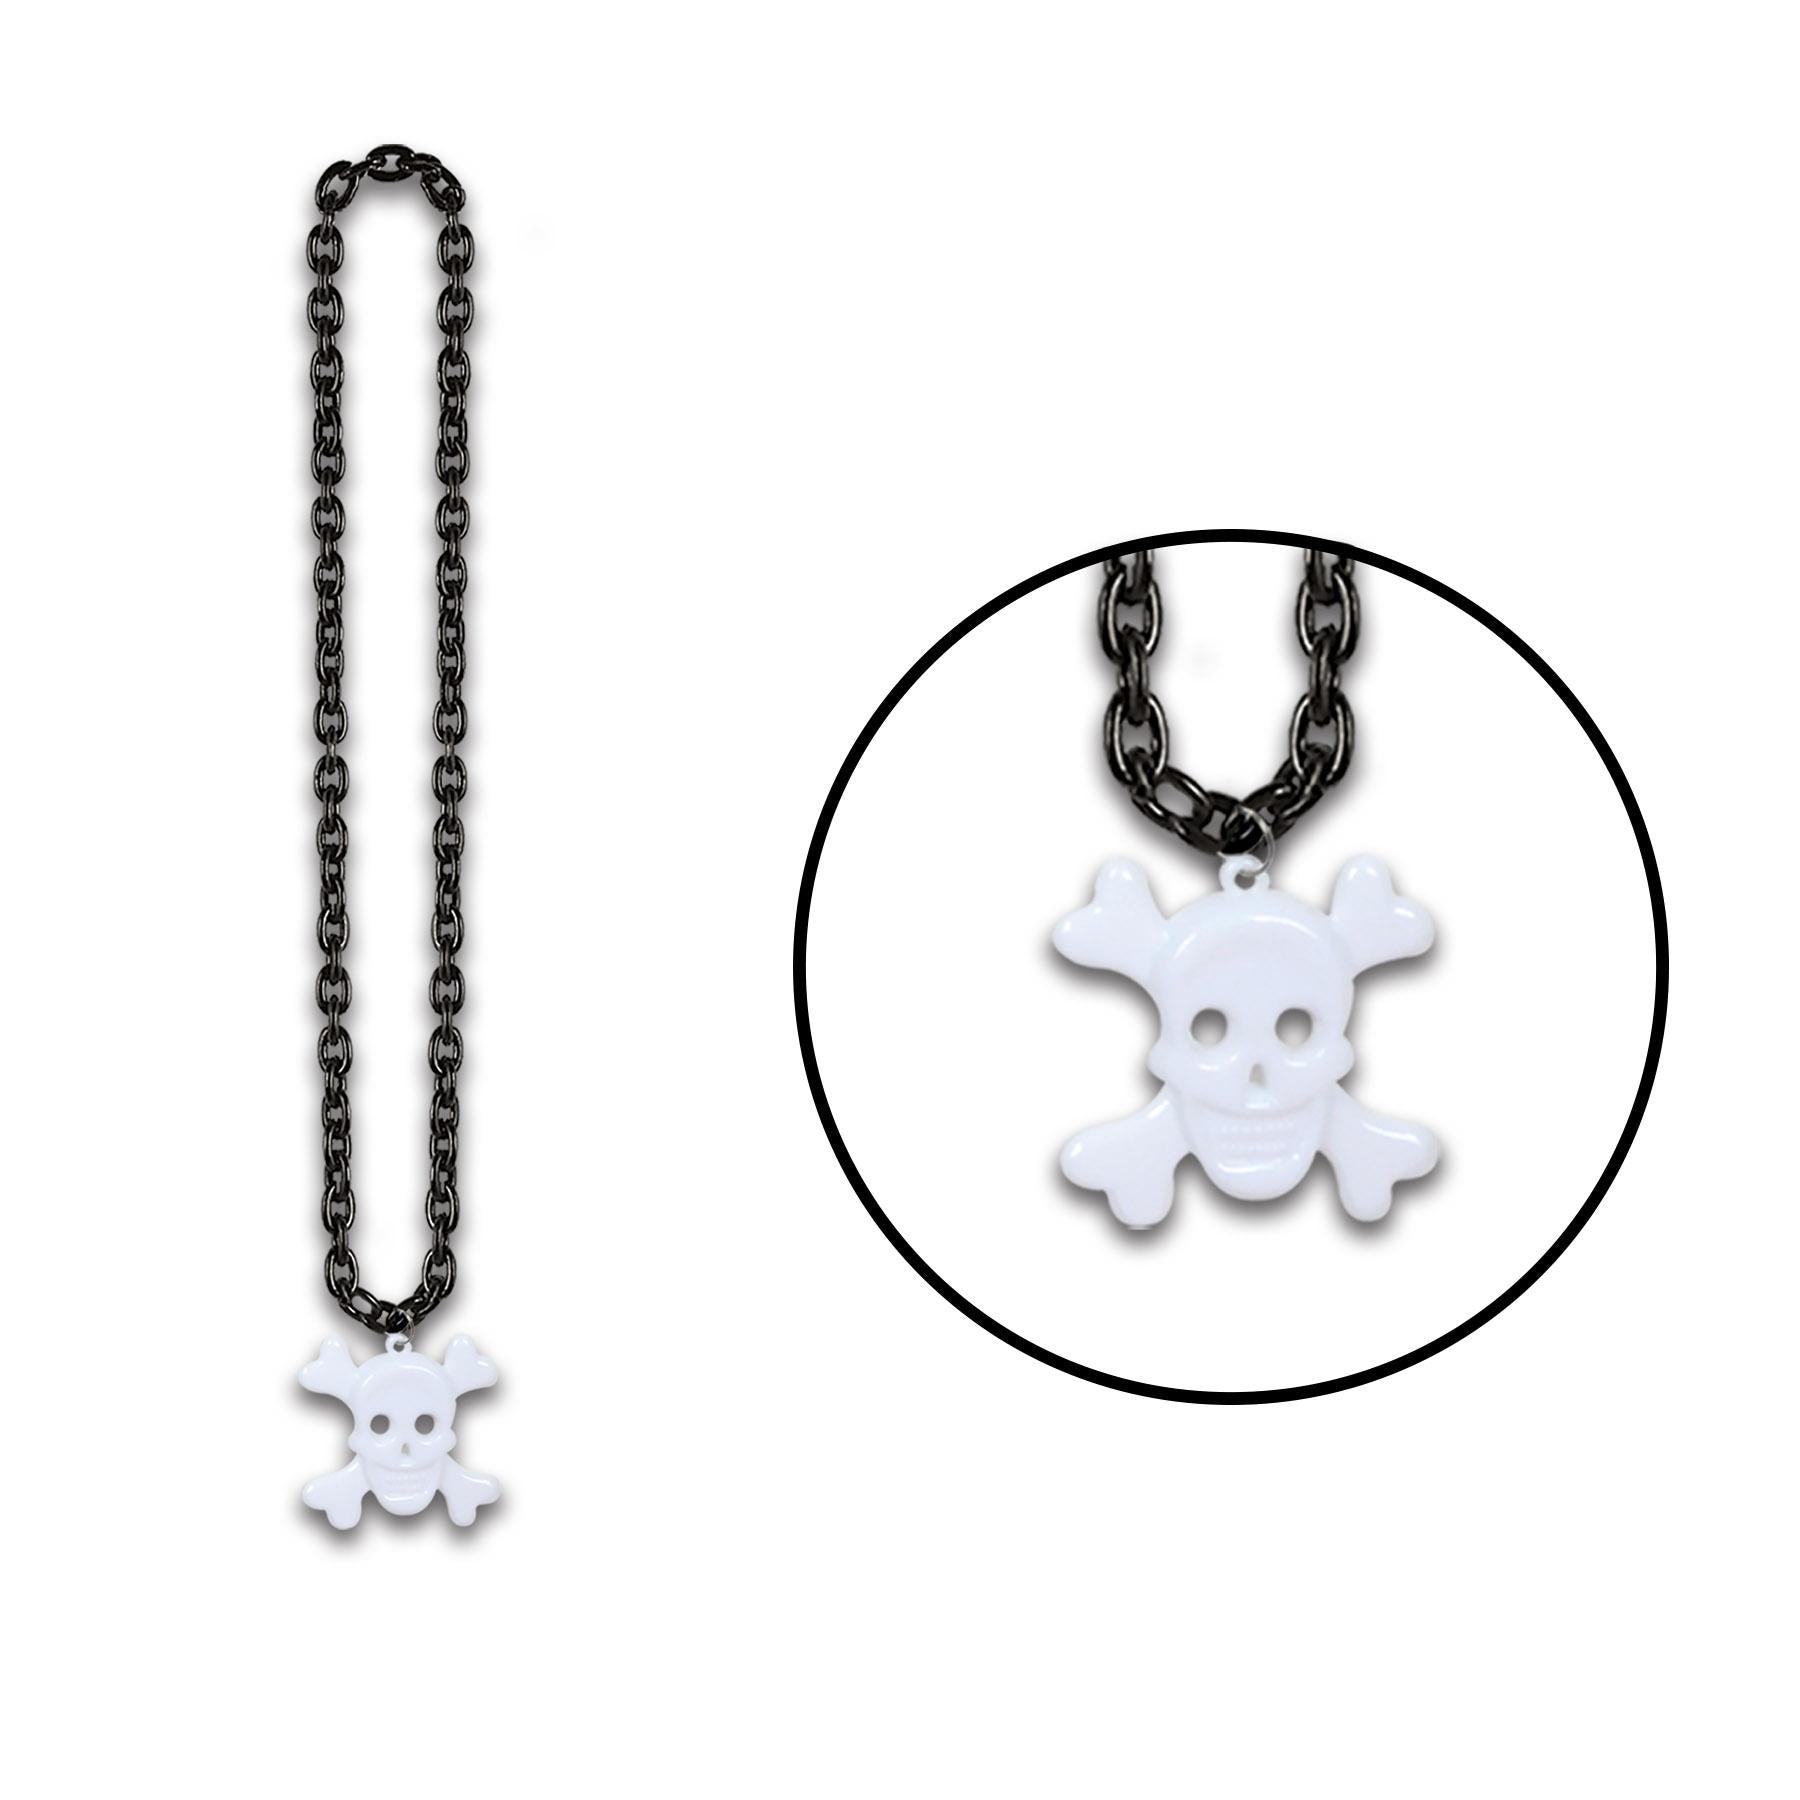 Halloween Chain Bead Necklaces with Skull & Crossbones Medal